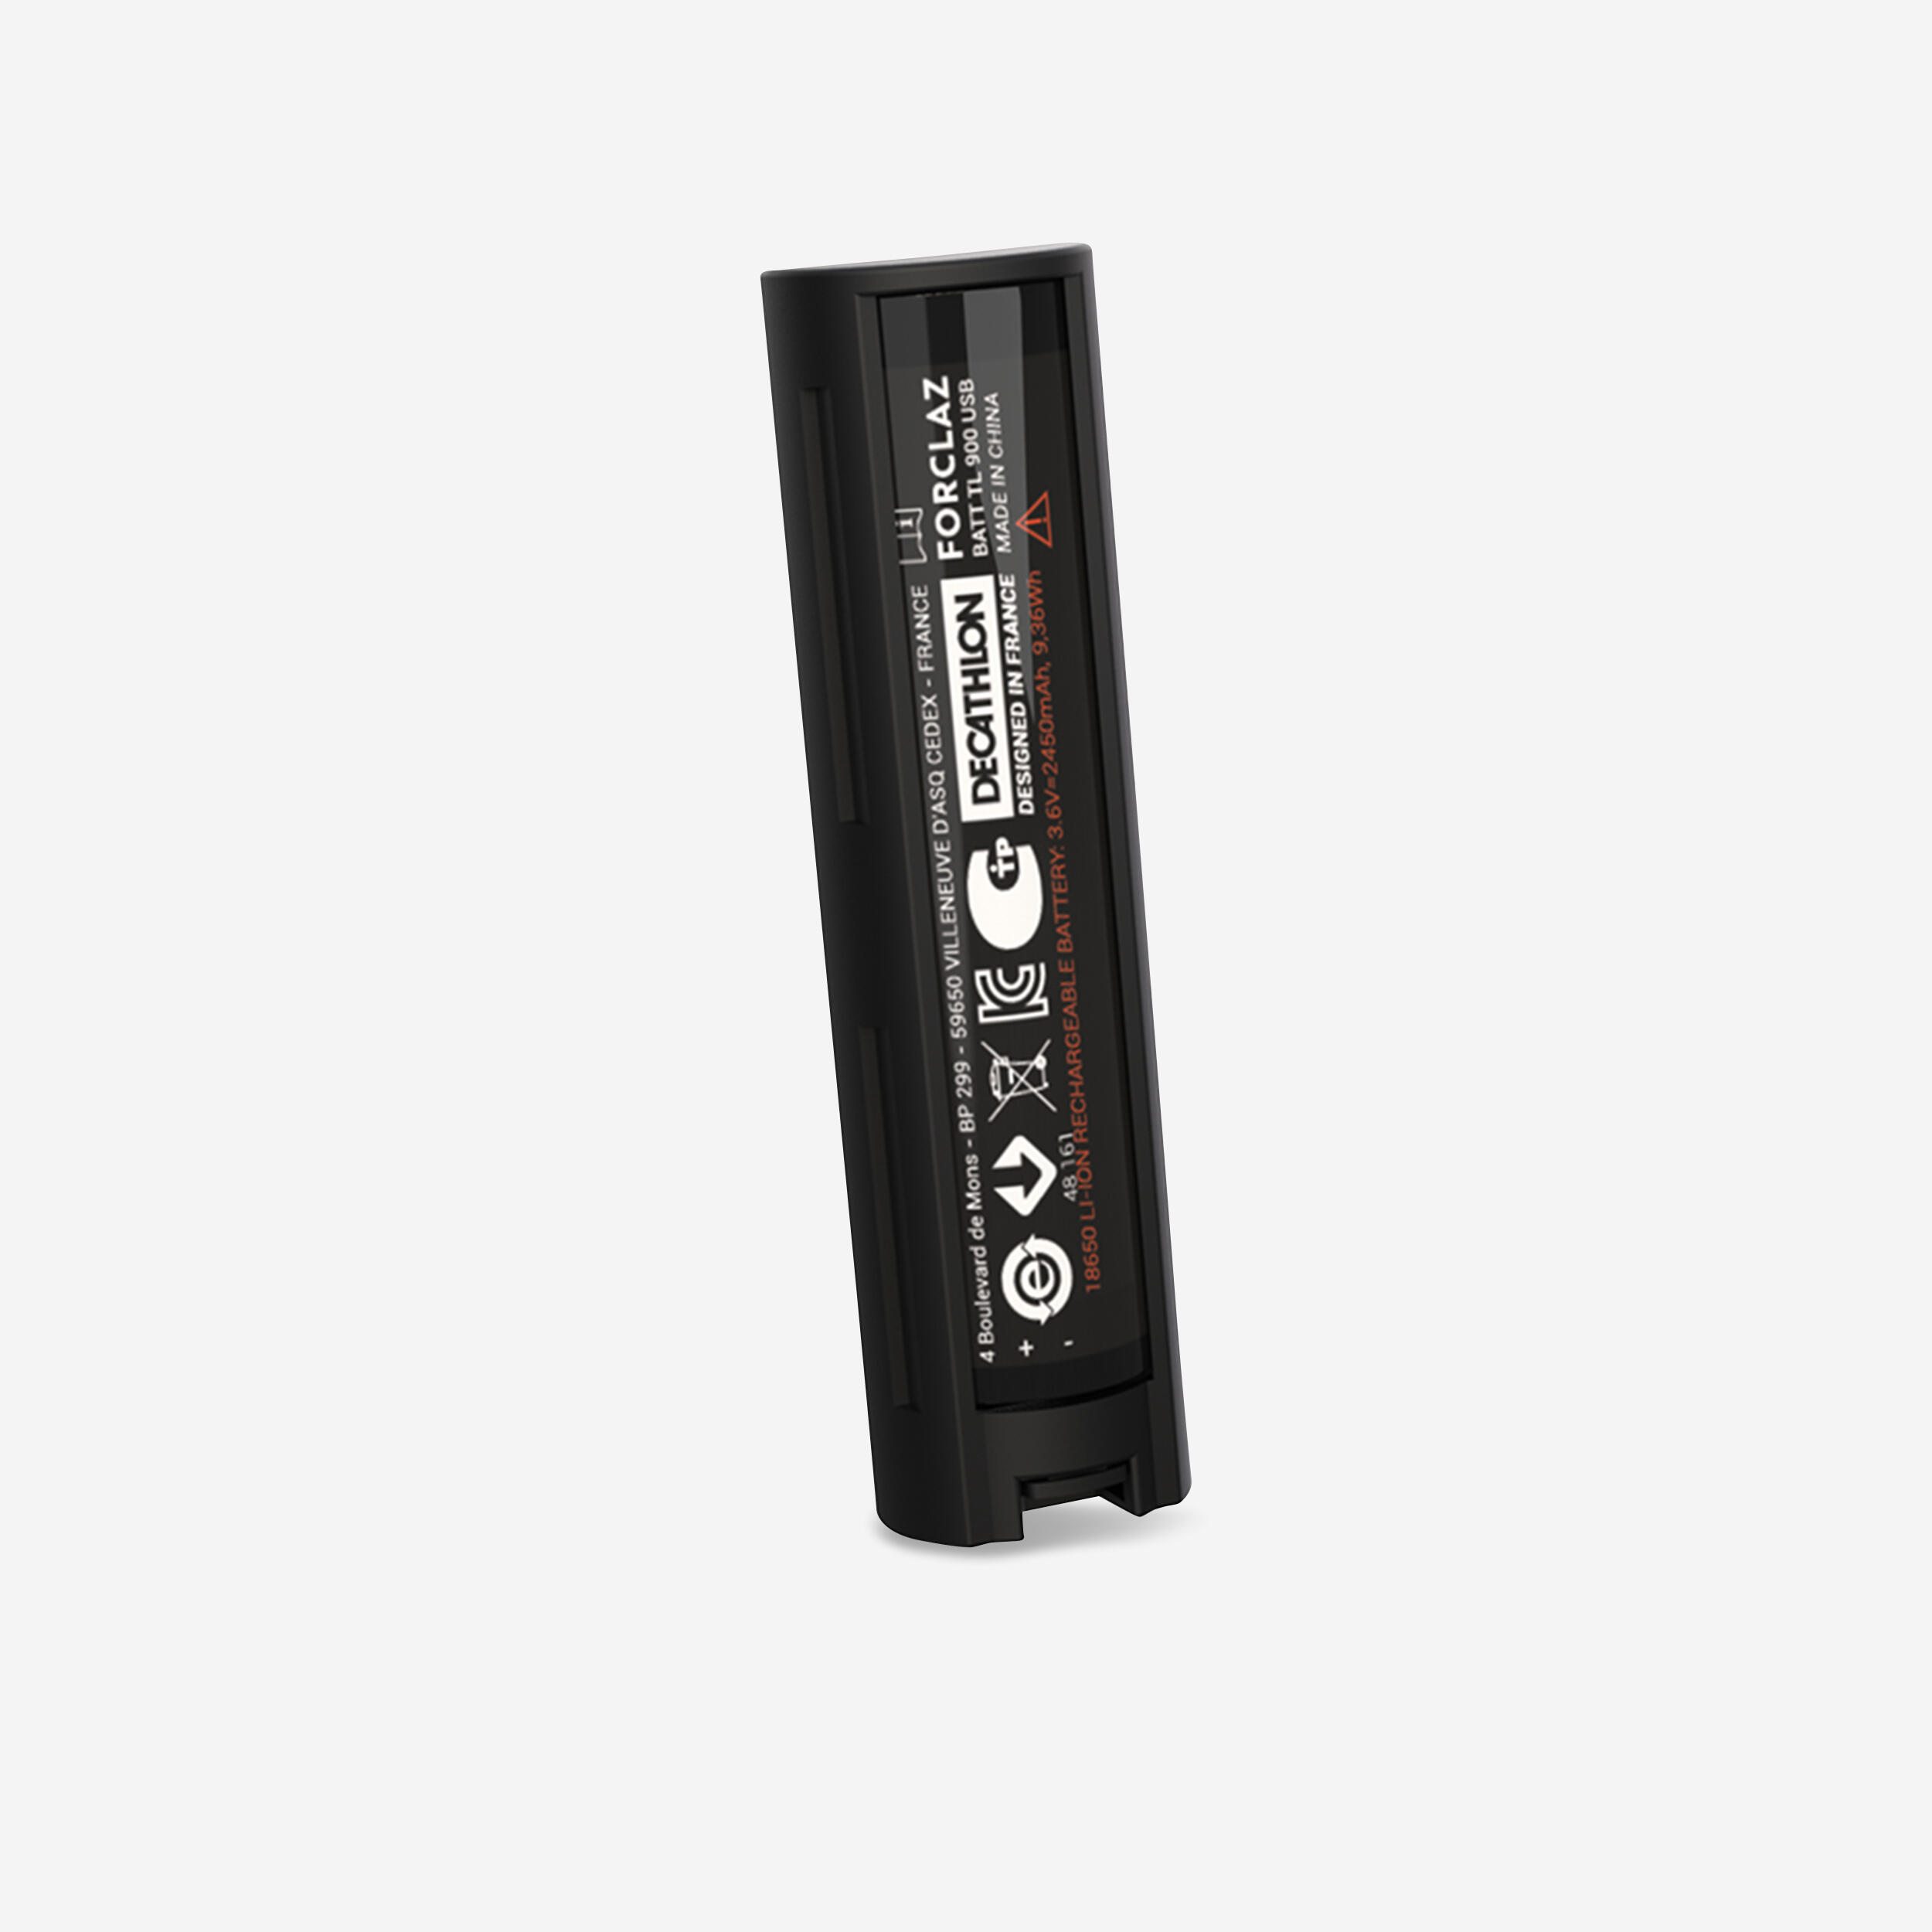 FORCLAZ Replacement torchlight battery - 2,450 mAh - TL900